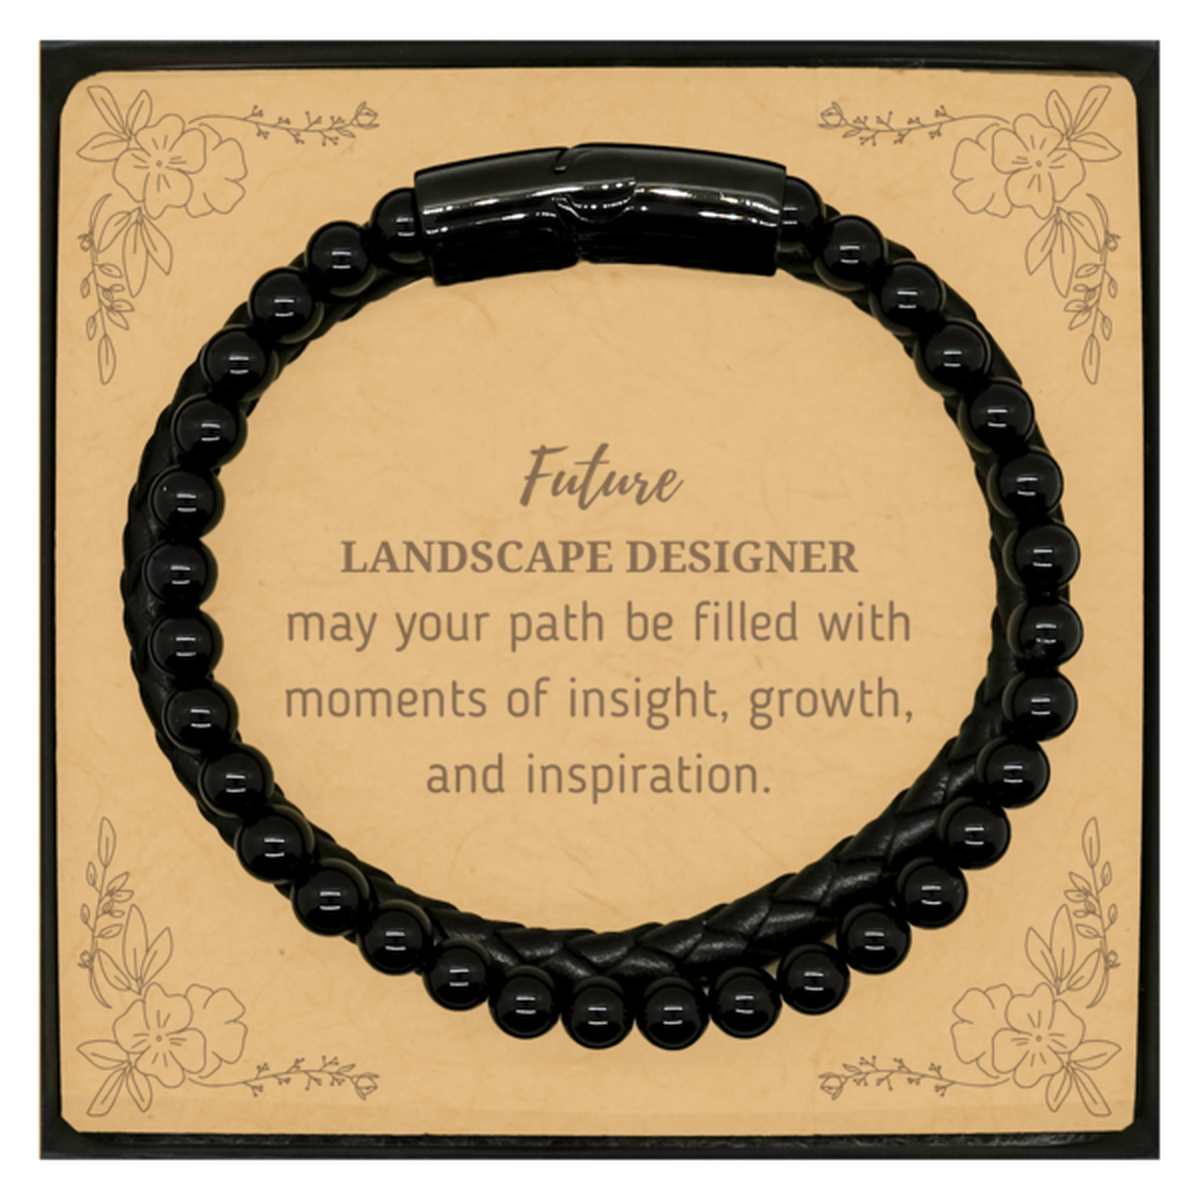 Future Landscape Designer Gifts, May your path be filled with moments of insight, Graduation Gifts for New Landscape Designer, Christmas Unique Stone Leather Bracelets For Men, Women, Friends